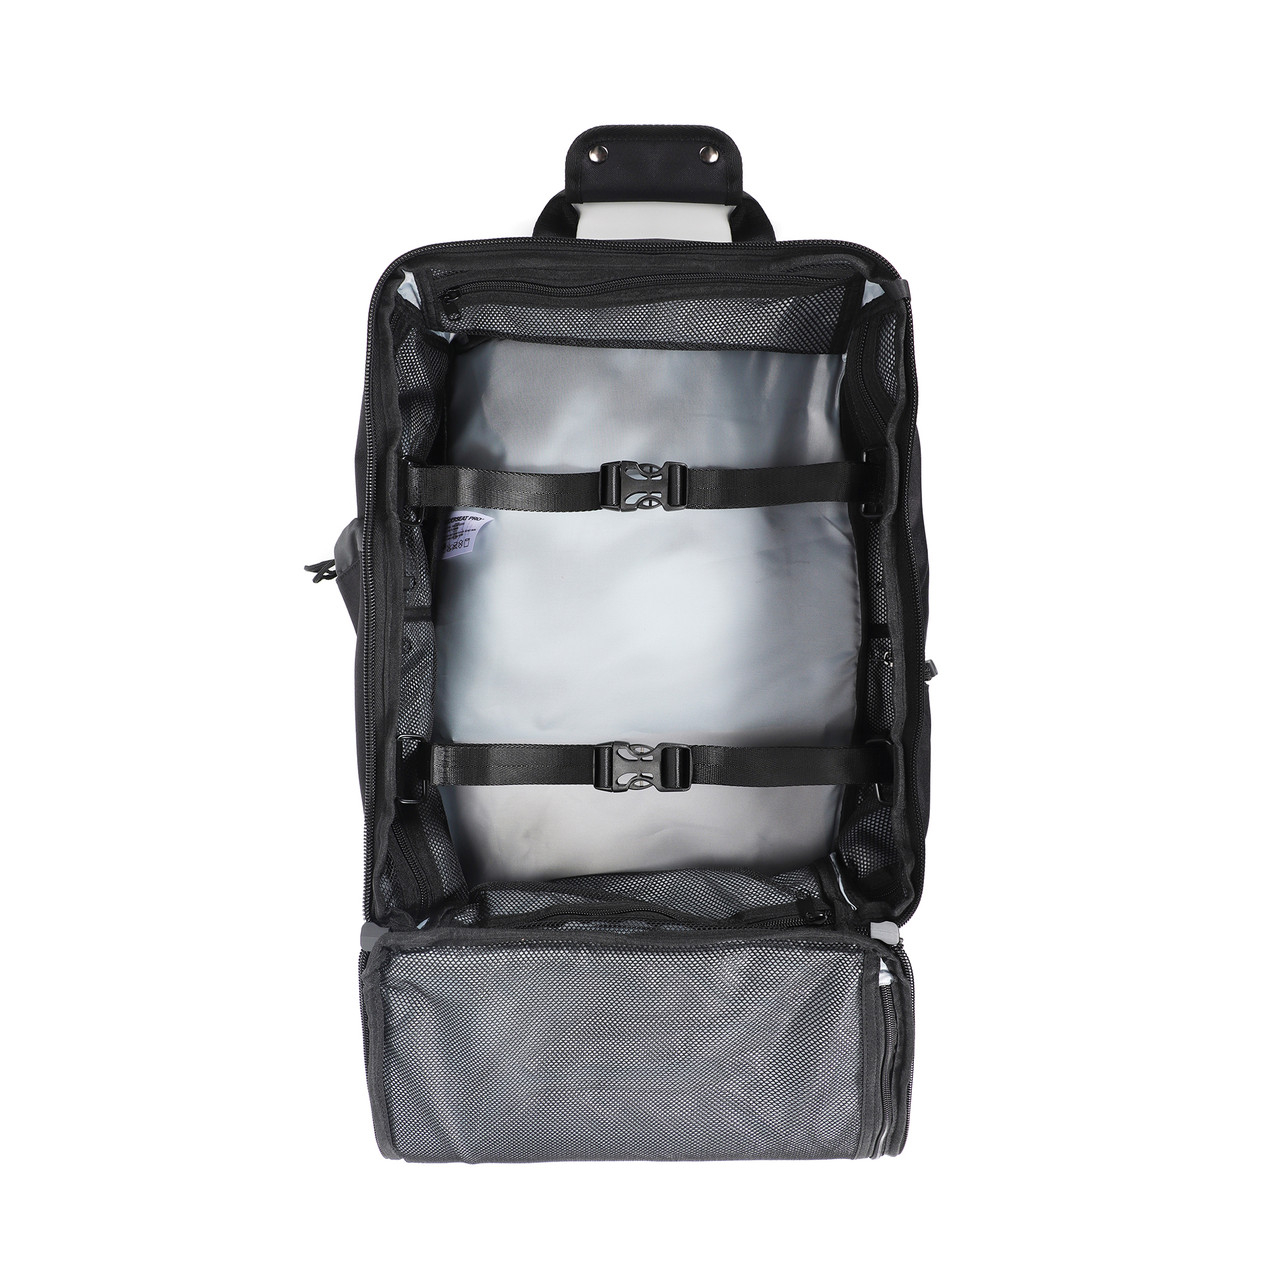 Avoid Carry-On Fees with these Personal Item Backpacks (18x14x8 bags) 